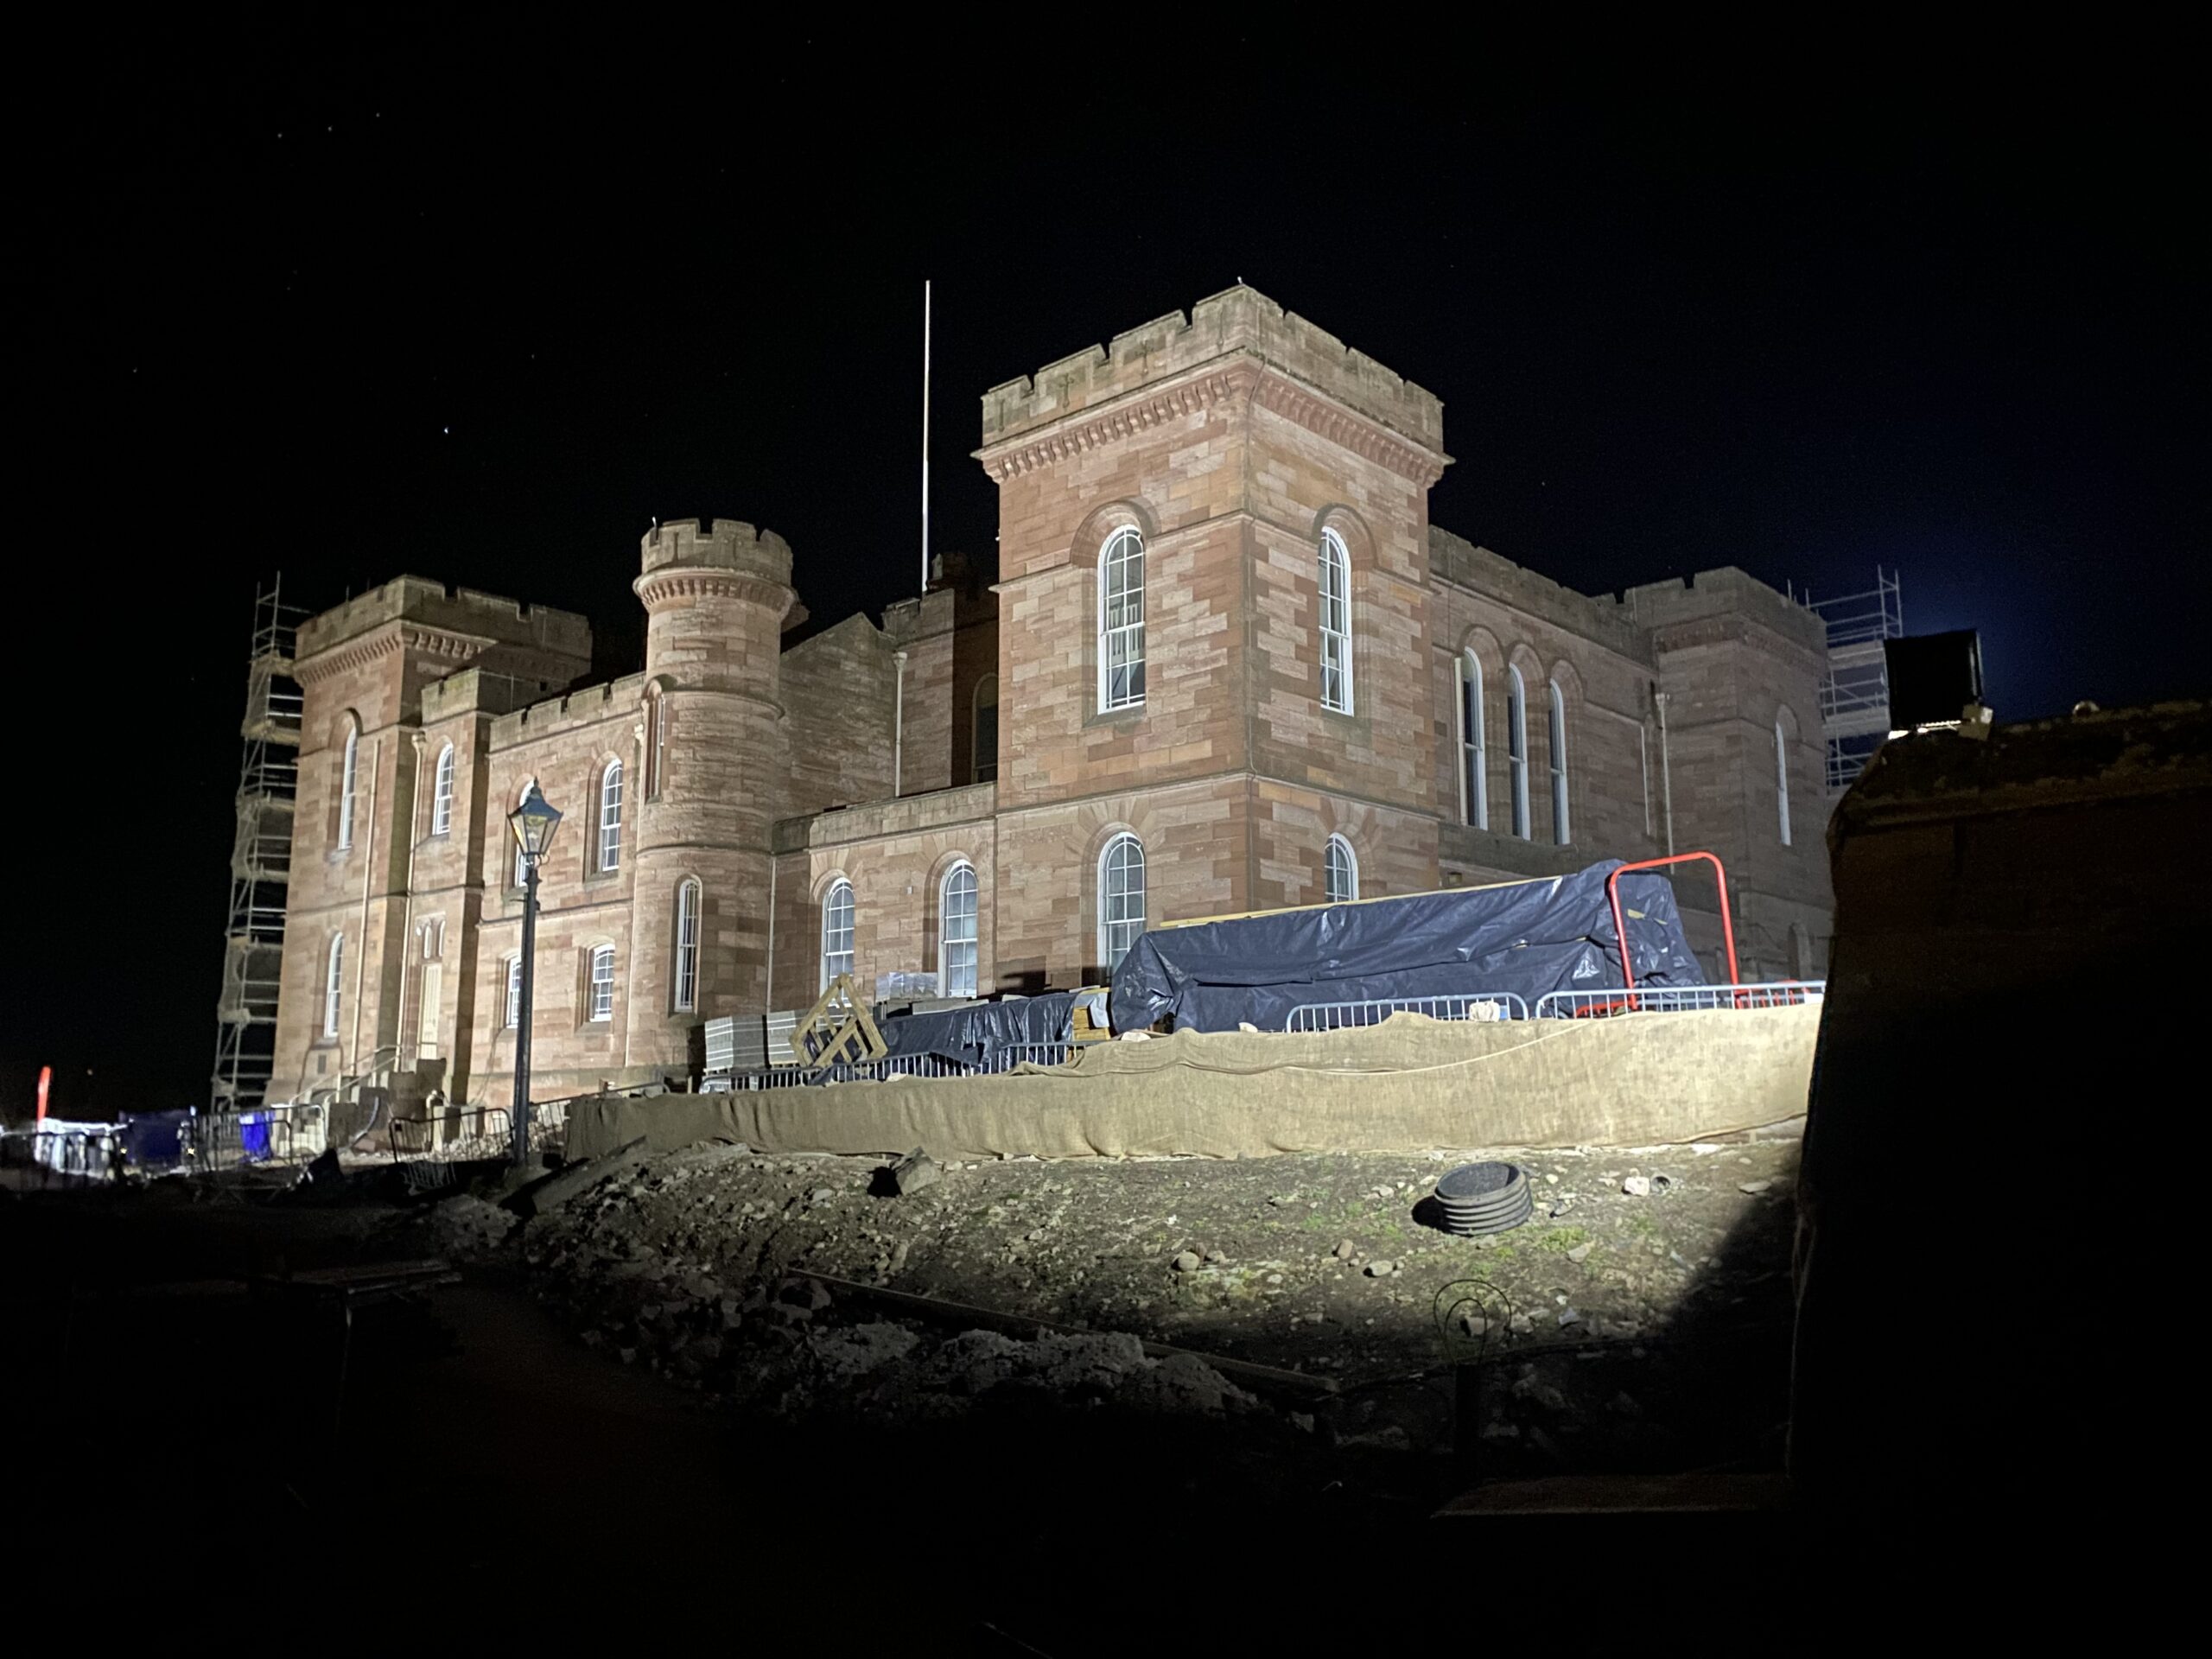 Inverness castle at night